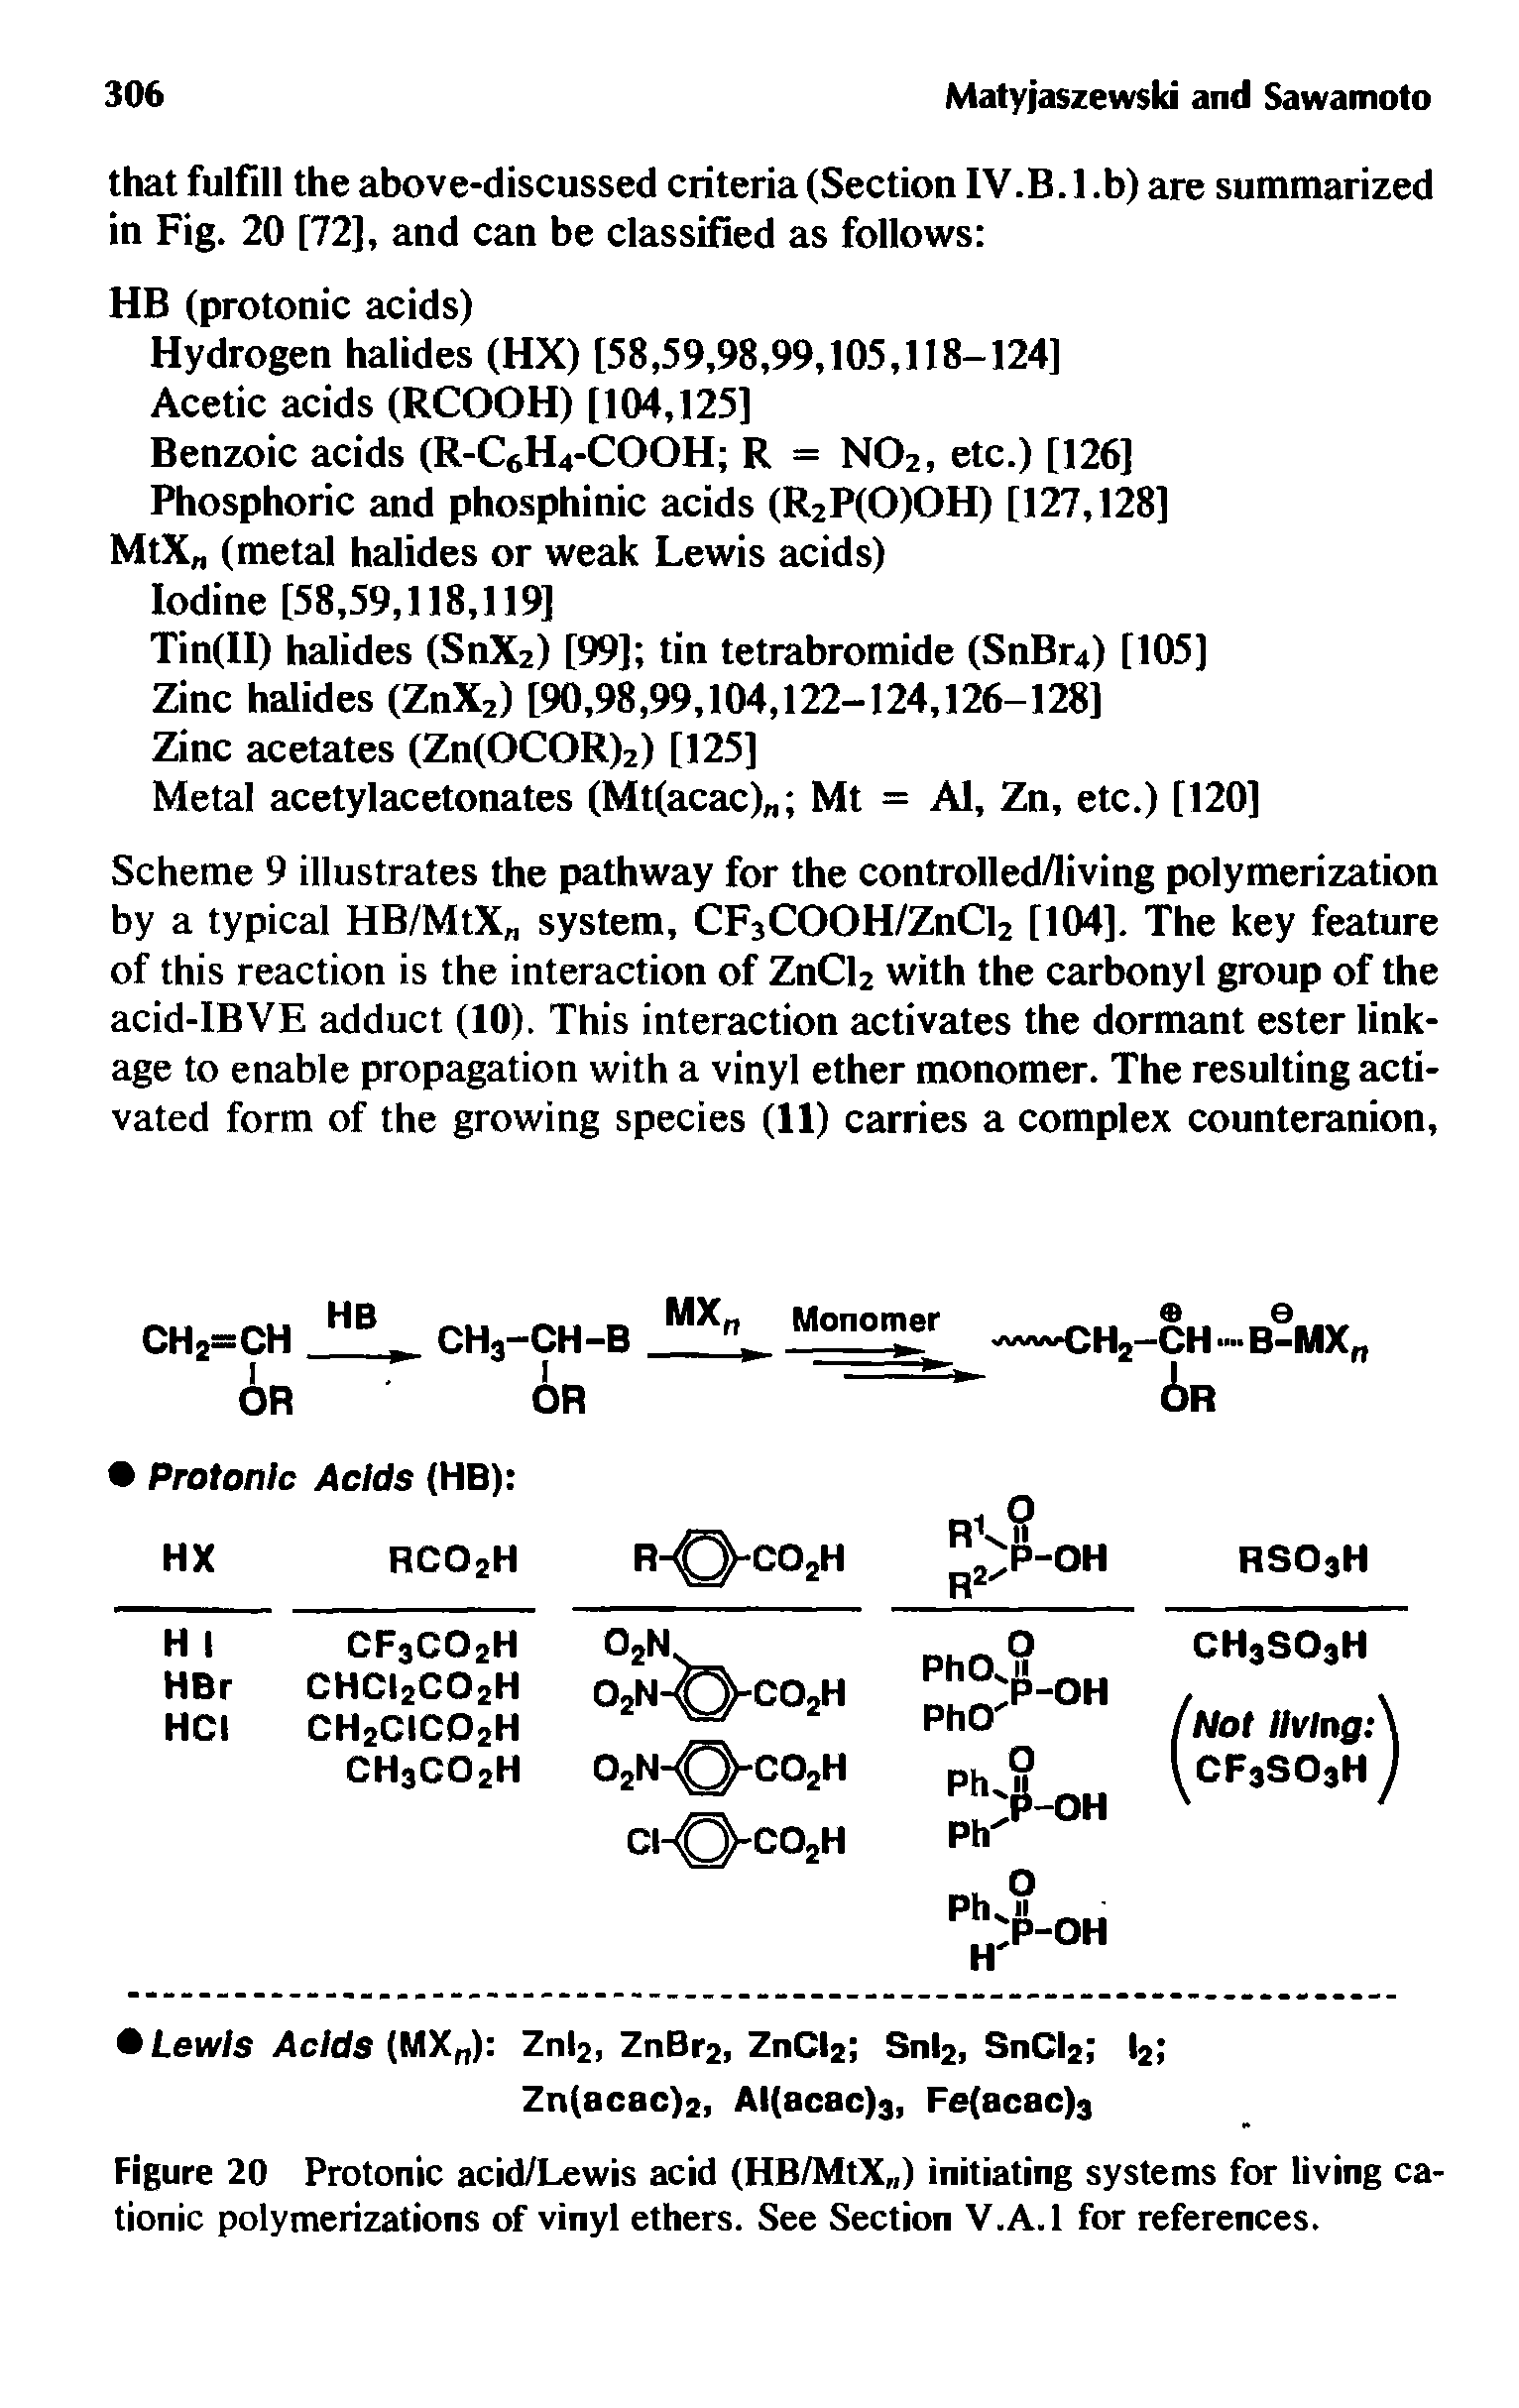 Figure 20 Protonic acid/Lewis acid (HB/MtX ) initiating systems for living cationic polymerizations of vinyl ethers. See Section V.A.l for references.